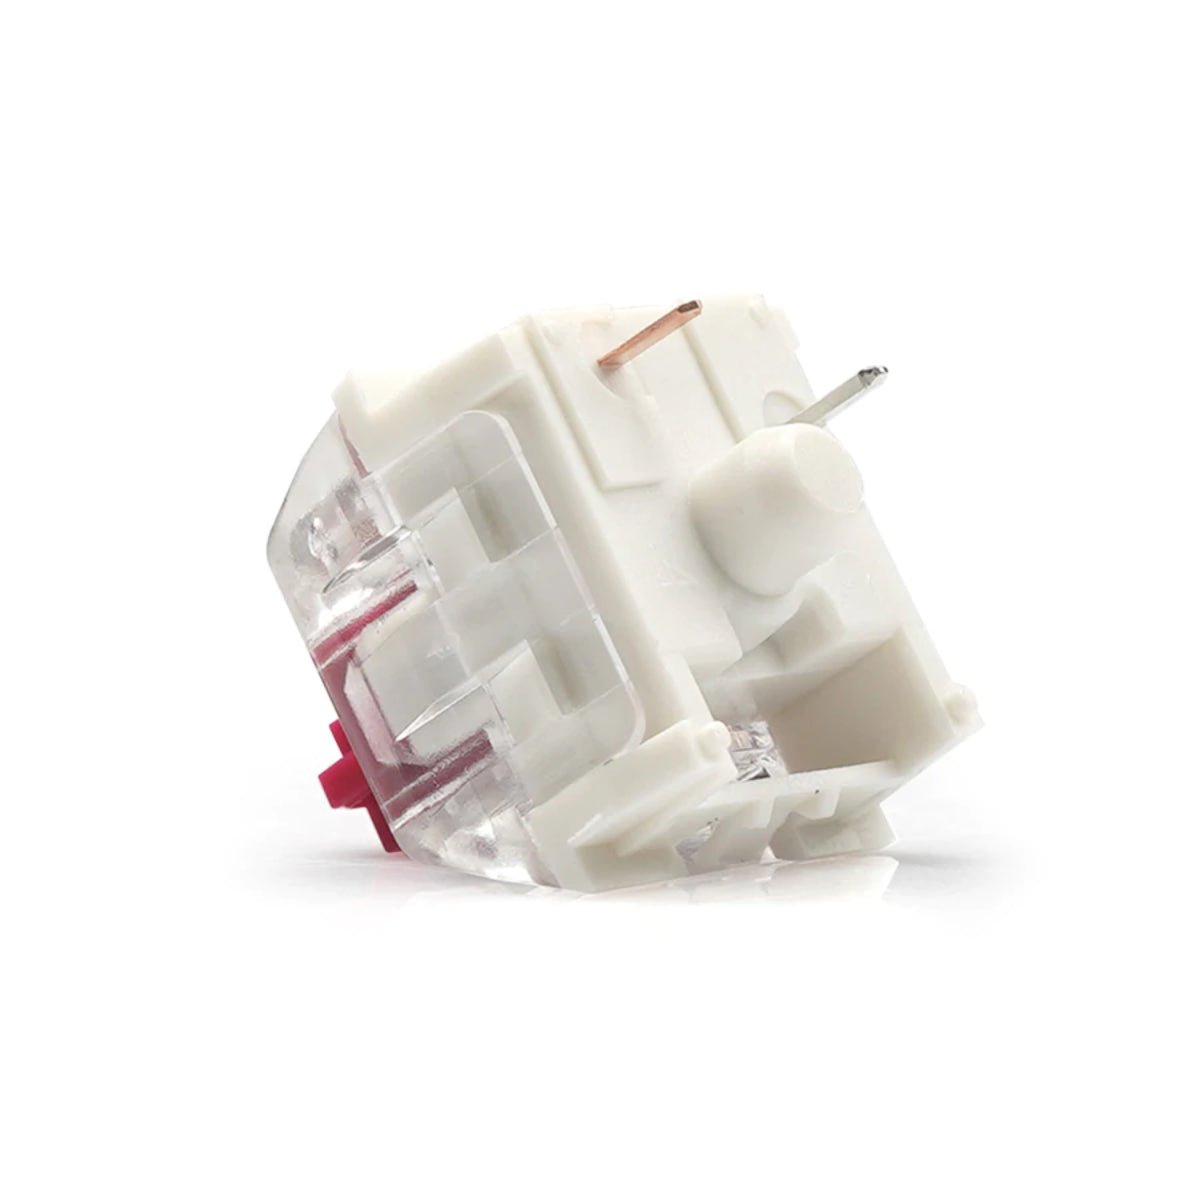 KBD Fans Kailh Pro Linear Switches - Burgundy - Store 974 | ستور ٩٧٤